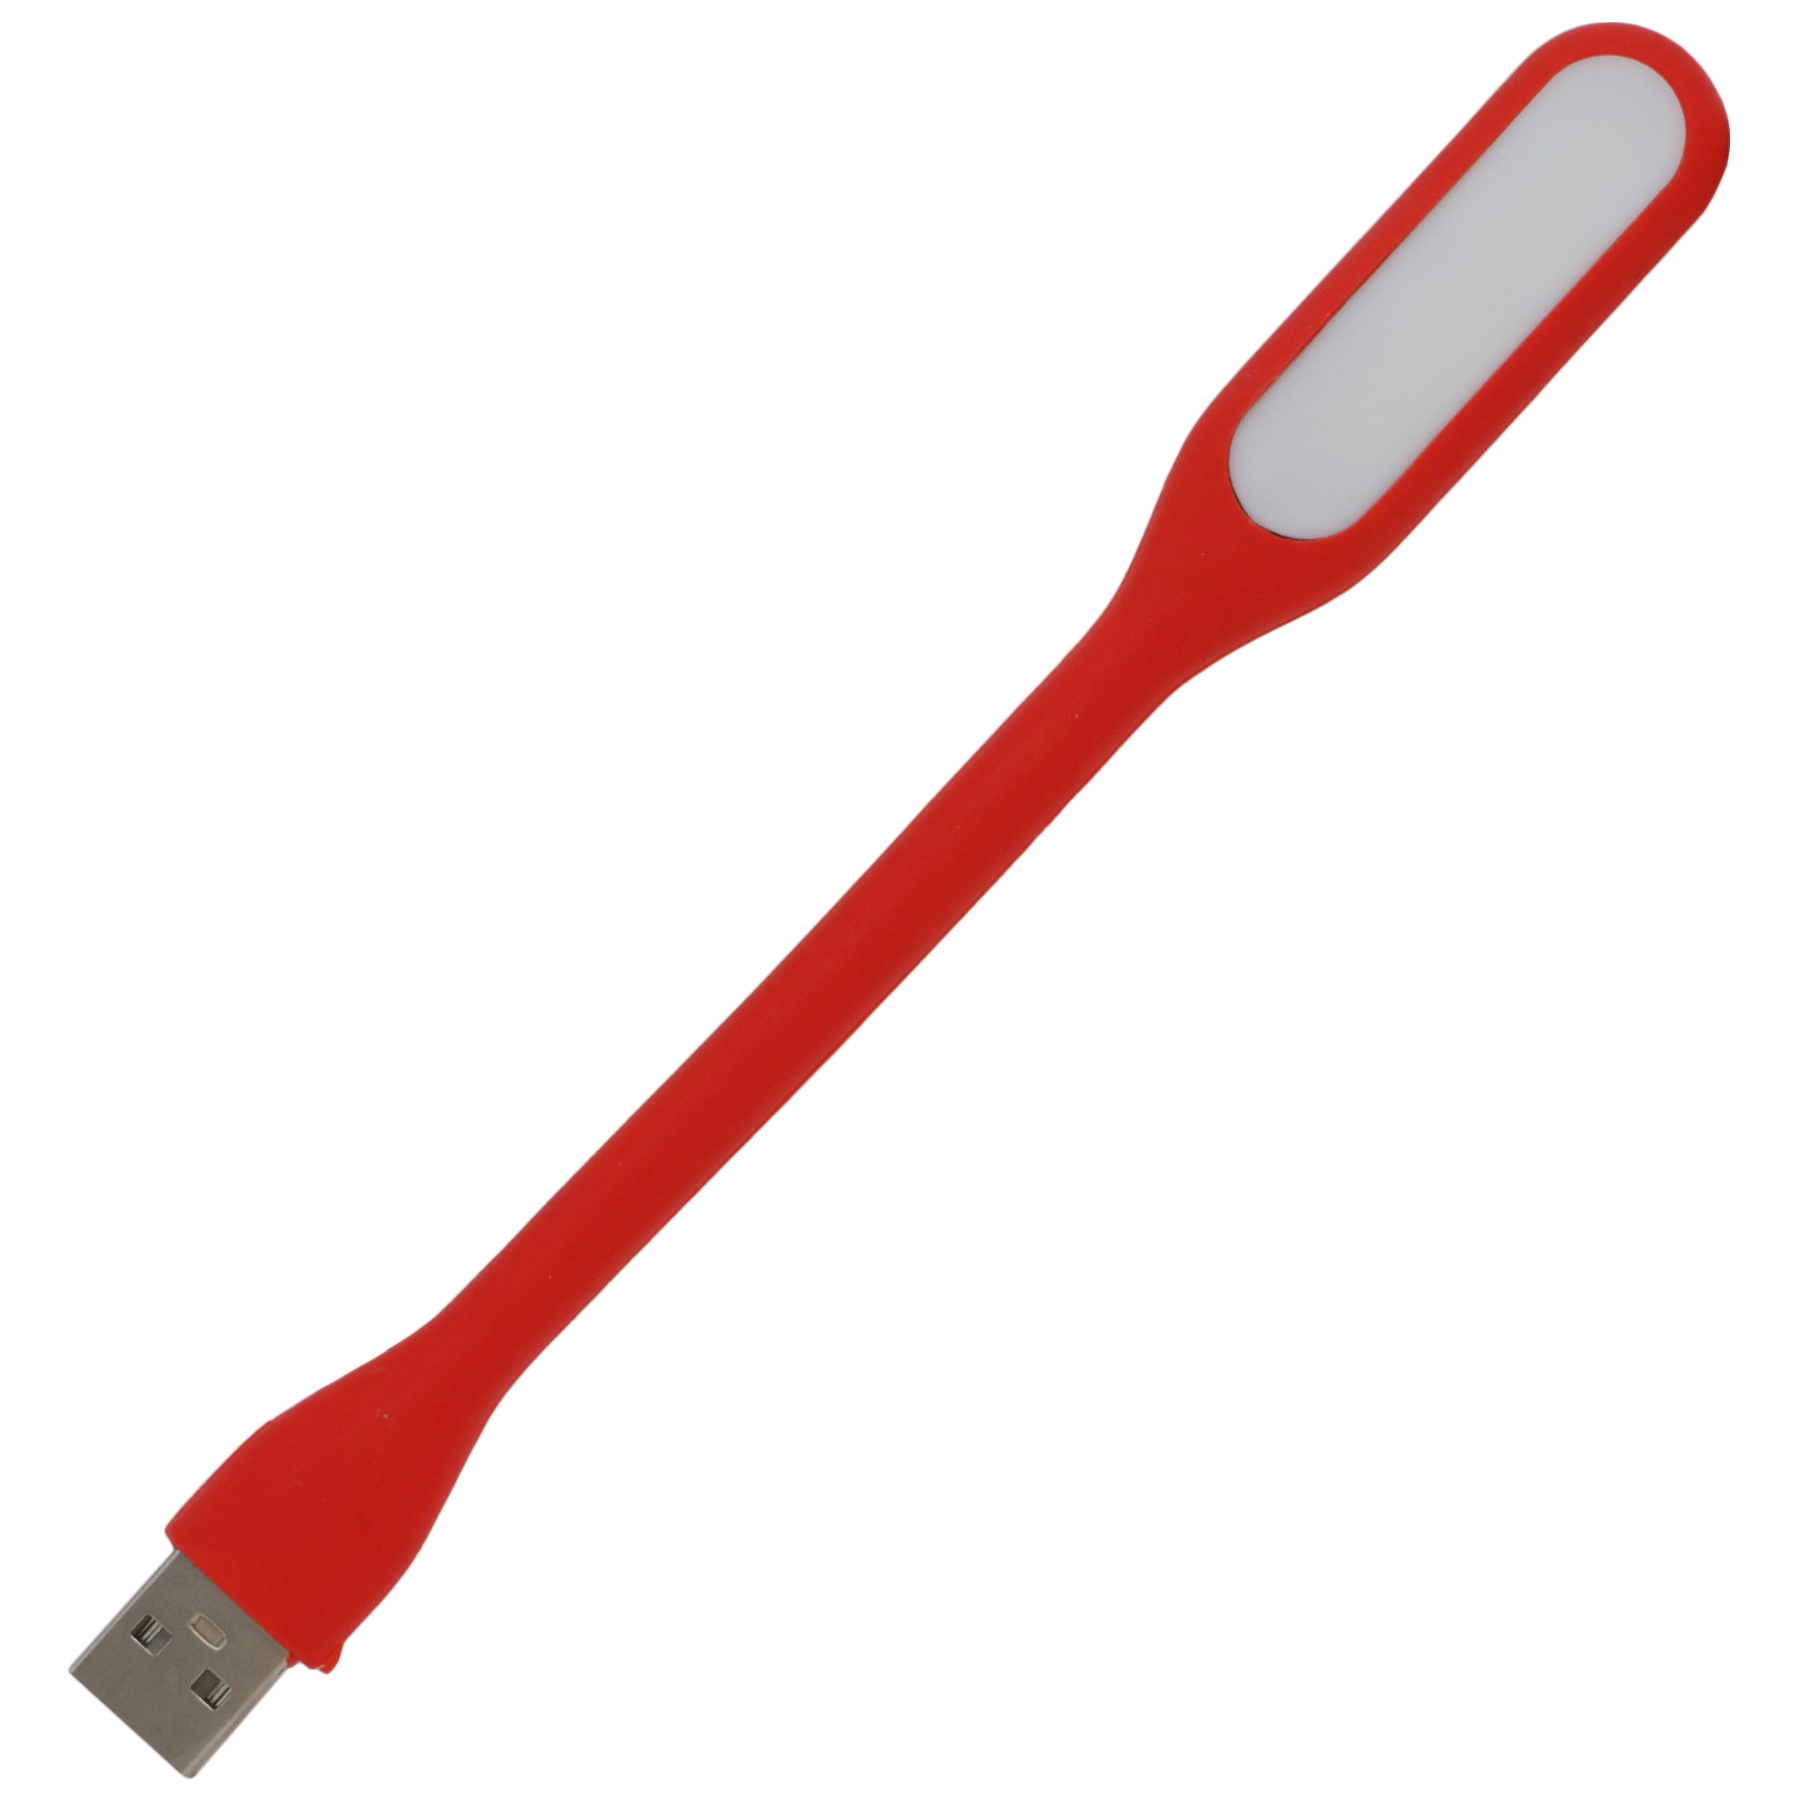 LAMPA LED USB pentru notebook, SPACER, red, "SPL-LED-RD" (include TV 0.18lei) thumb